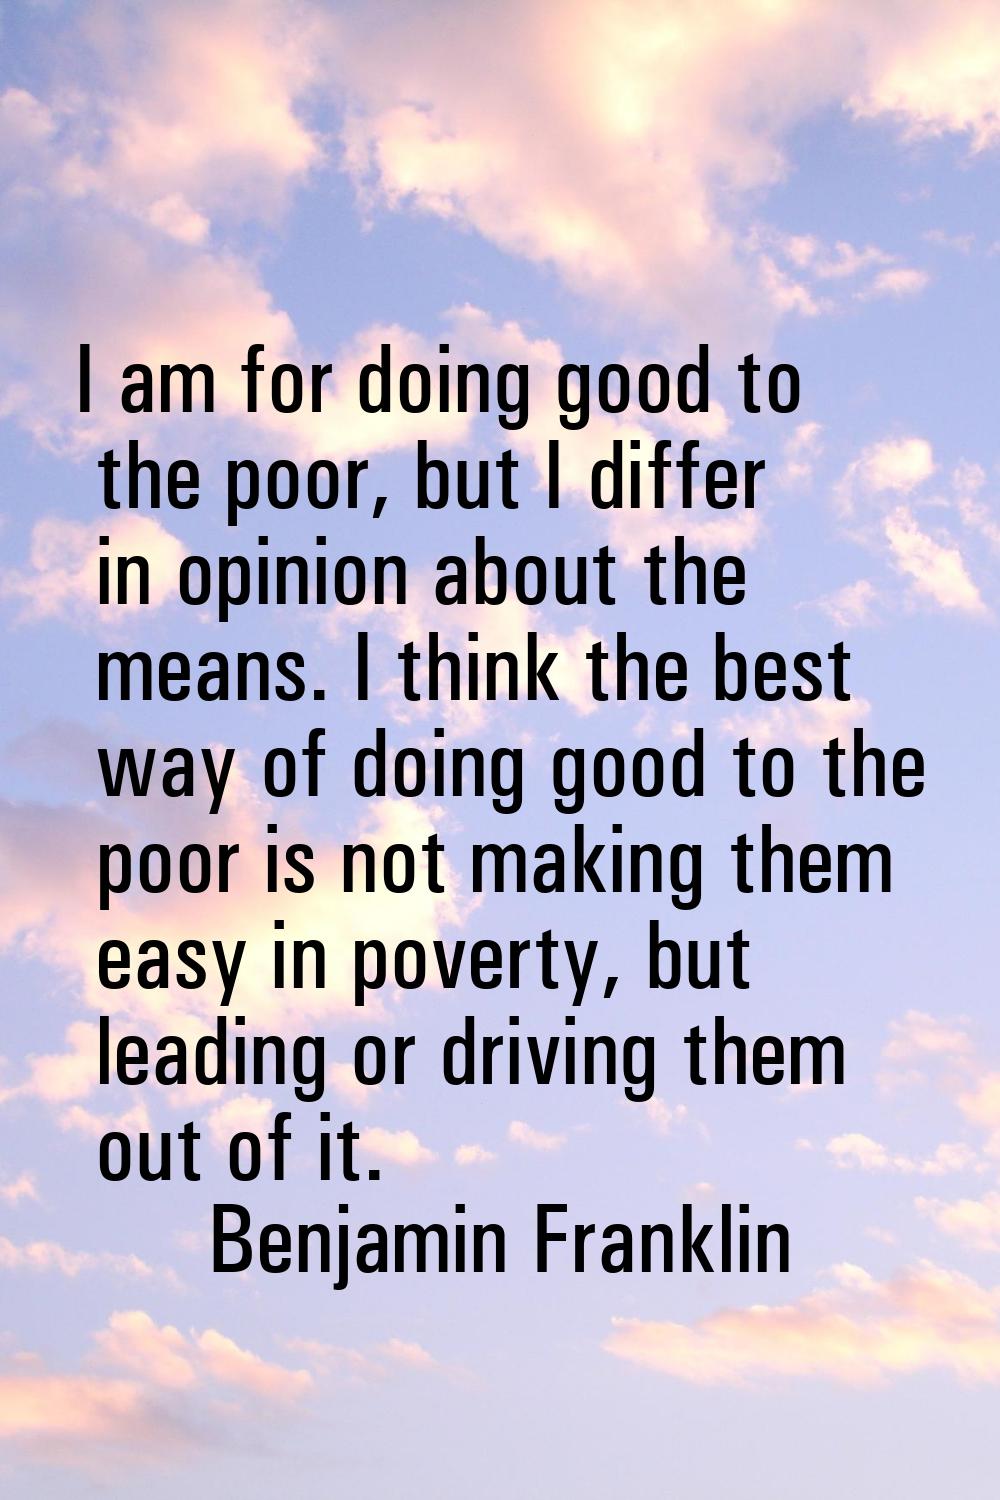 I am for doing good to the poor, but I differ in opinion about the means. I think the best way of d